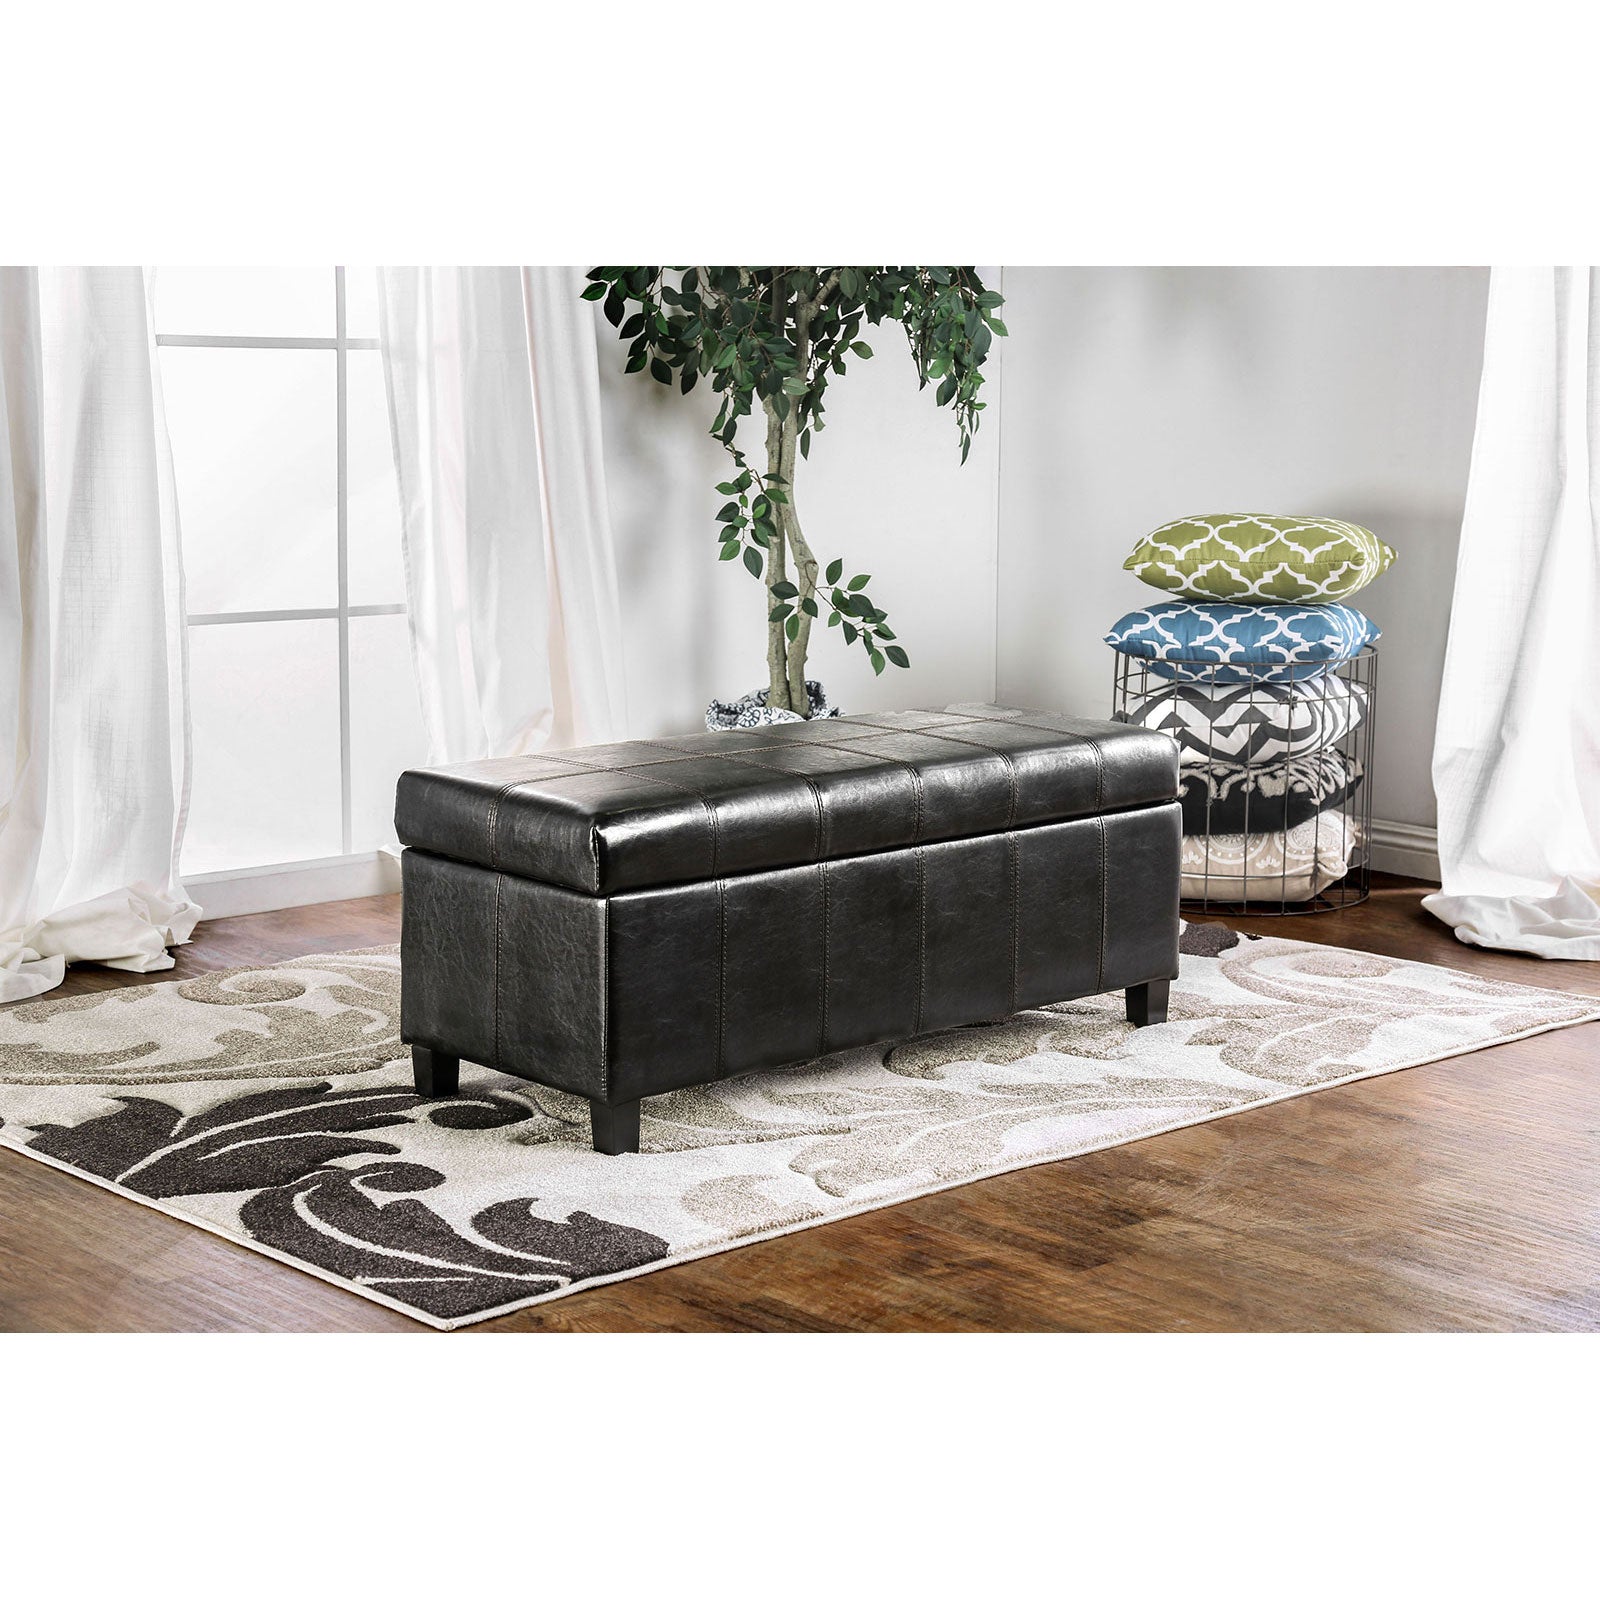 Furniture of America Luton Casual Espresso Storage Bench with Storage  43.5-in x 17.5-in x 18-in in the Benches department at